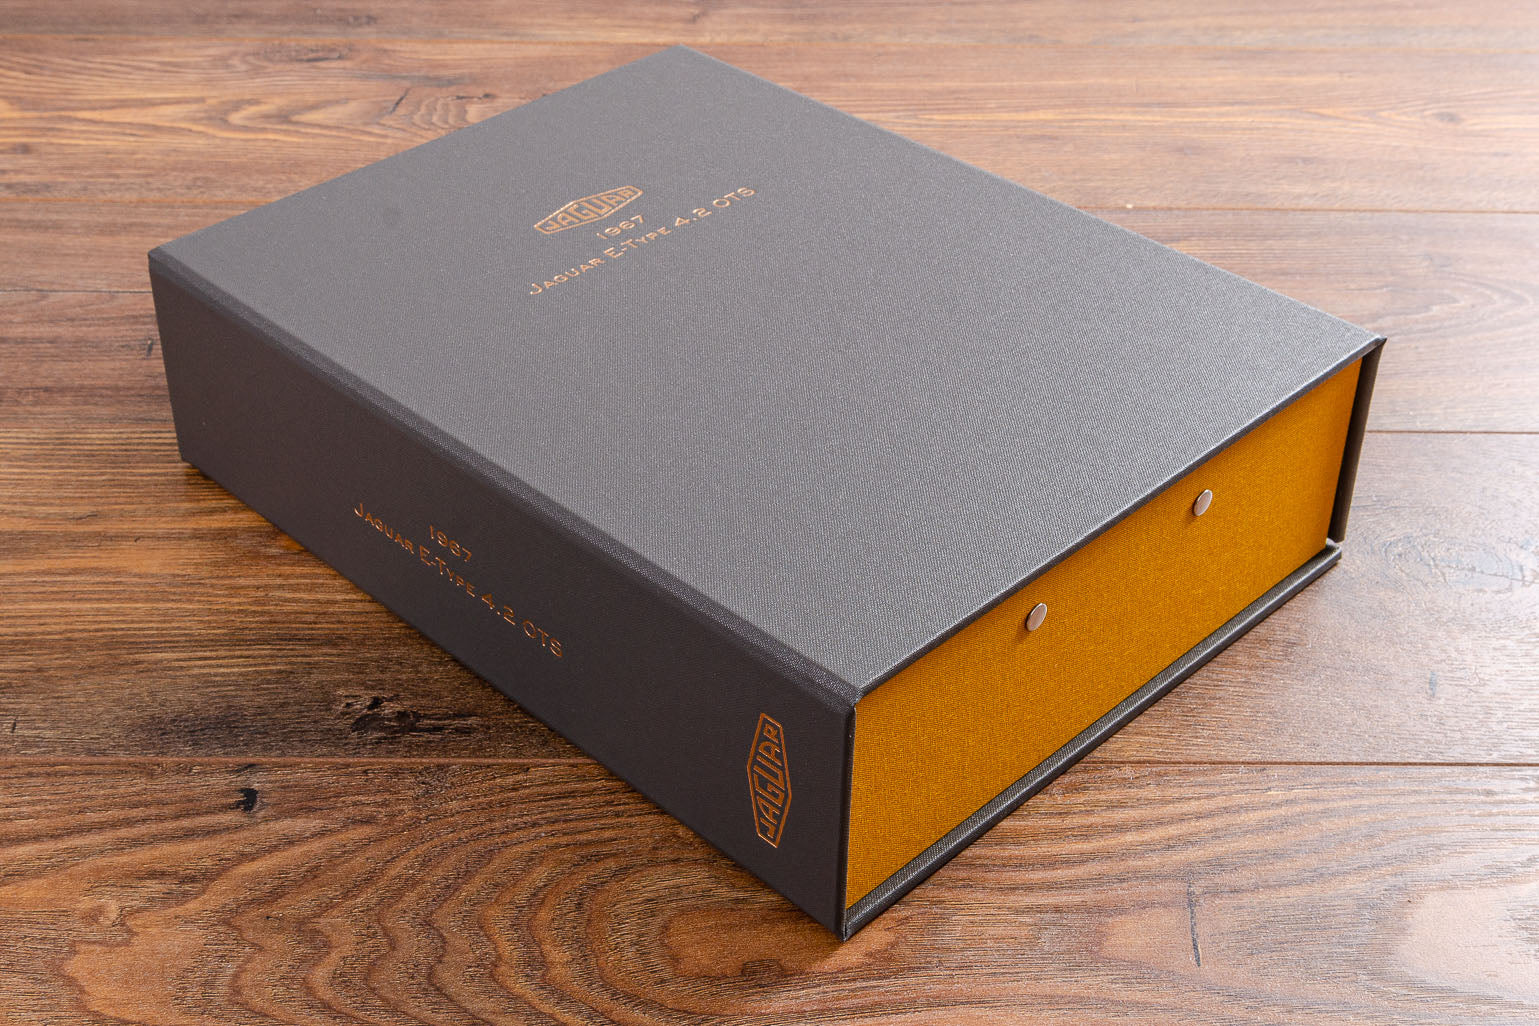 Customised vehicle document box with gold embossing on cover and spine